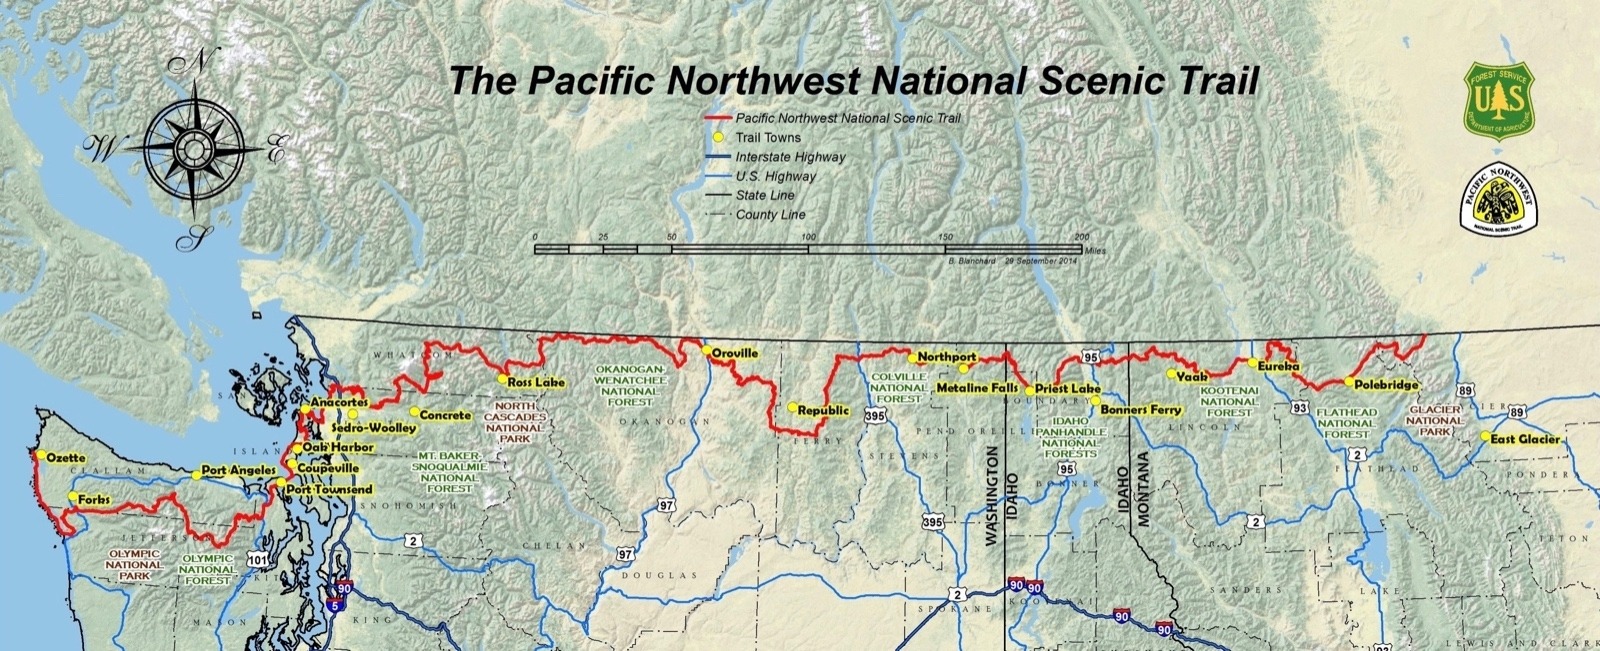 Proposed route of the Pacific Northwest Trail running from Glacier National Park to the Pacific Coast. Graphic courtesy US Forest Service